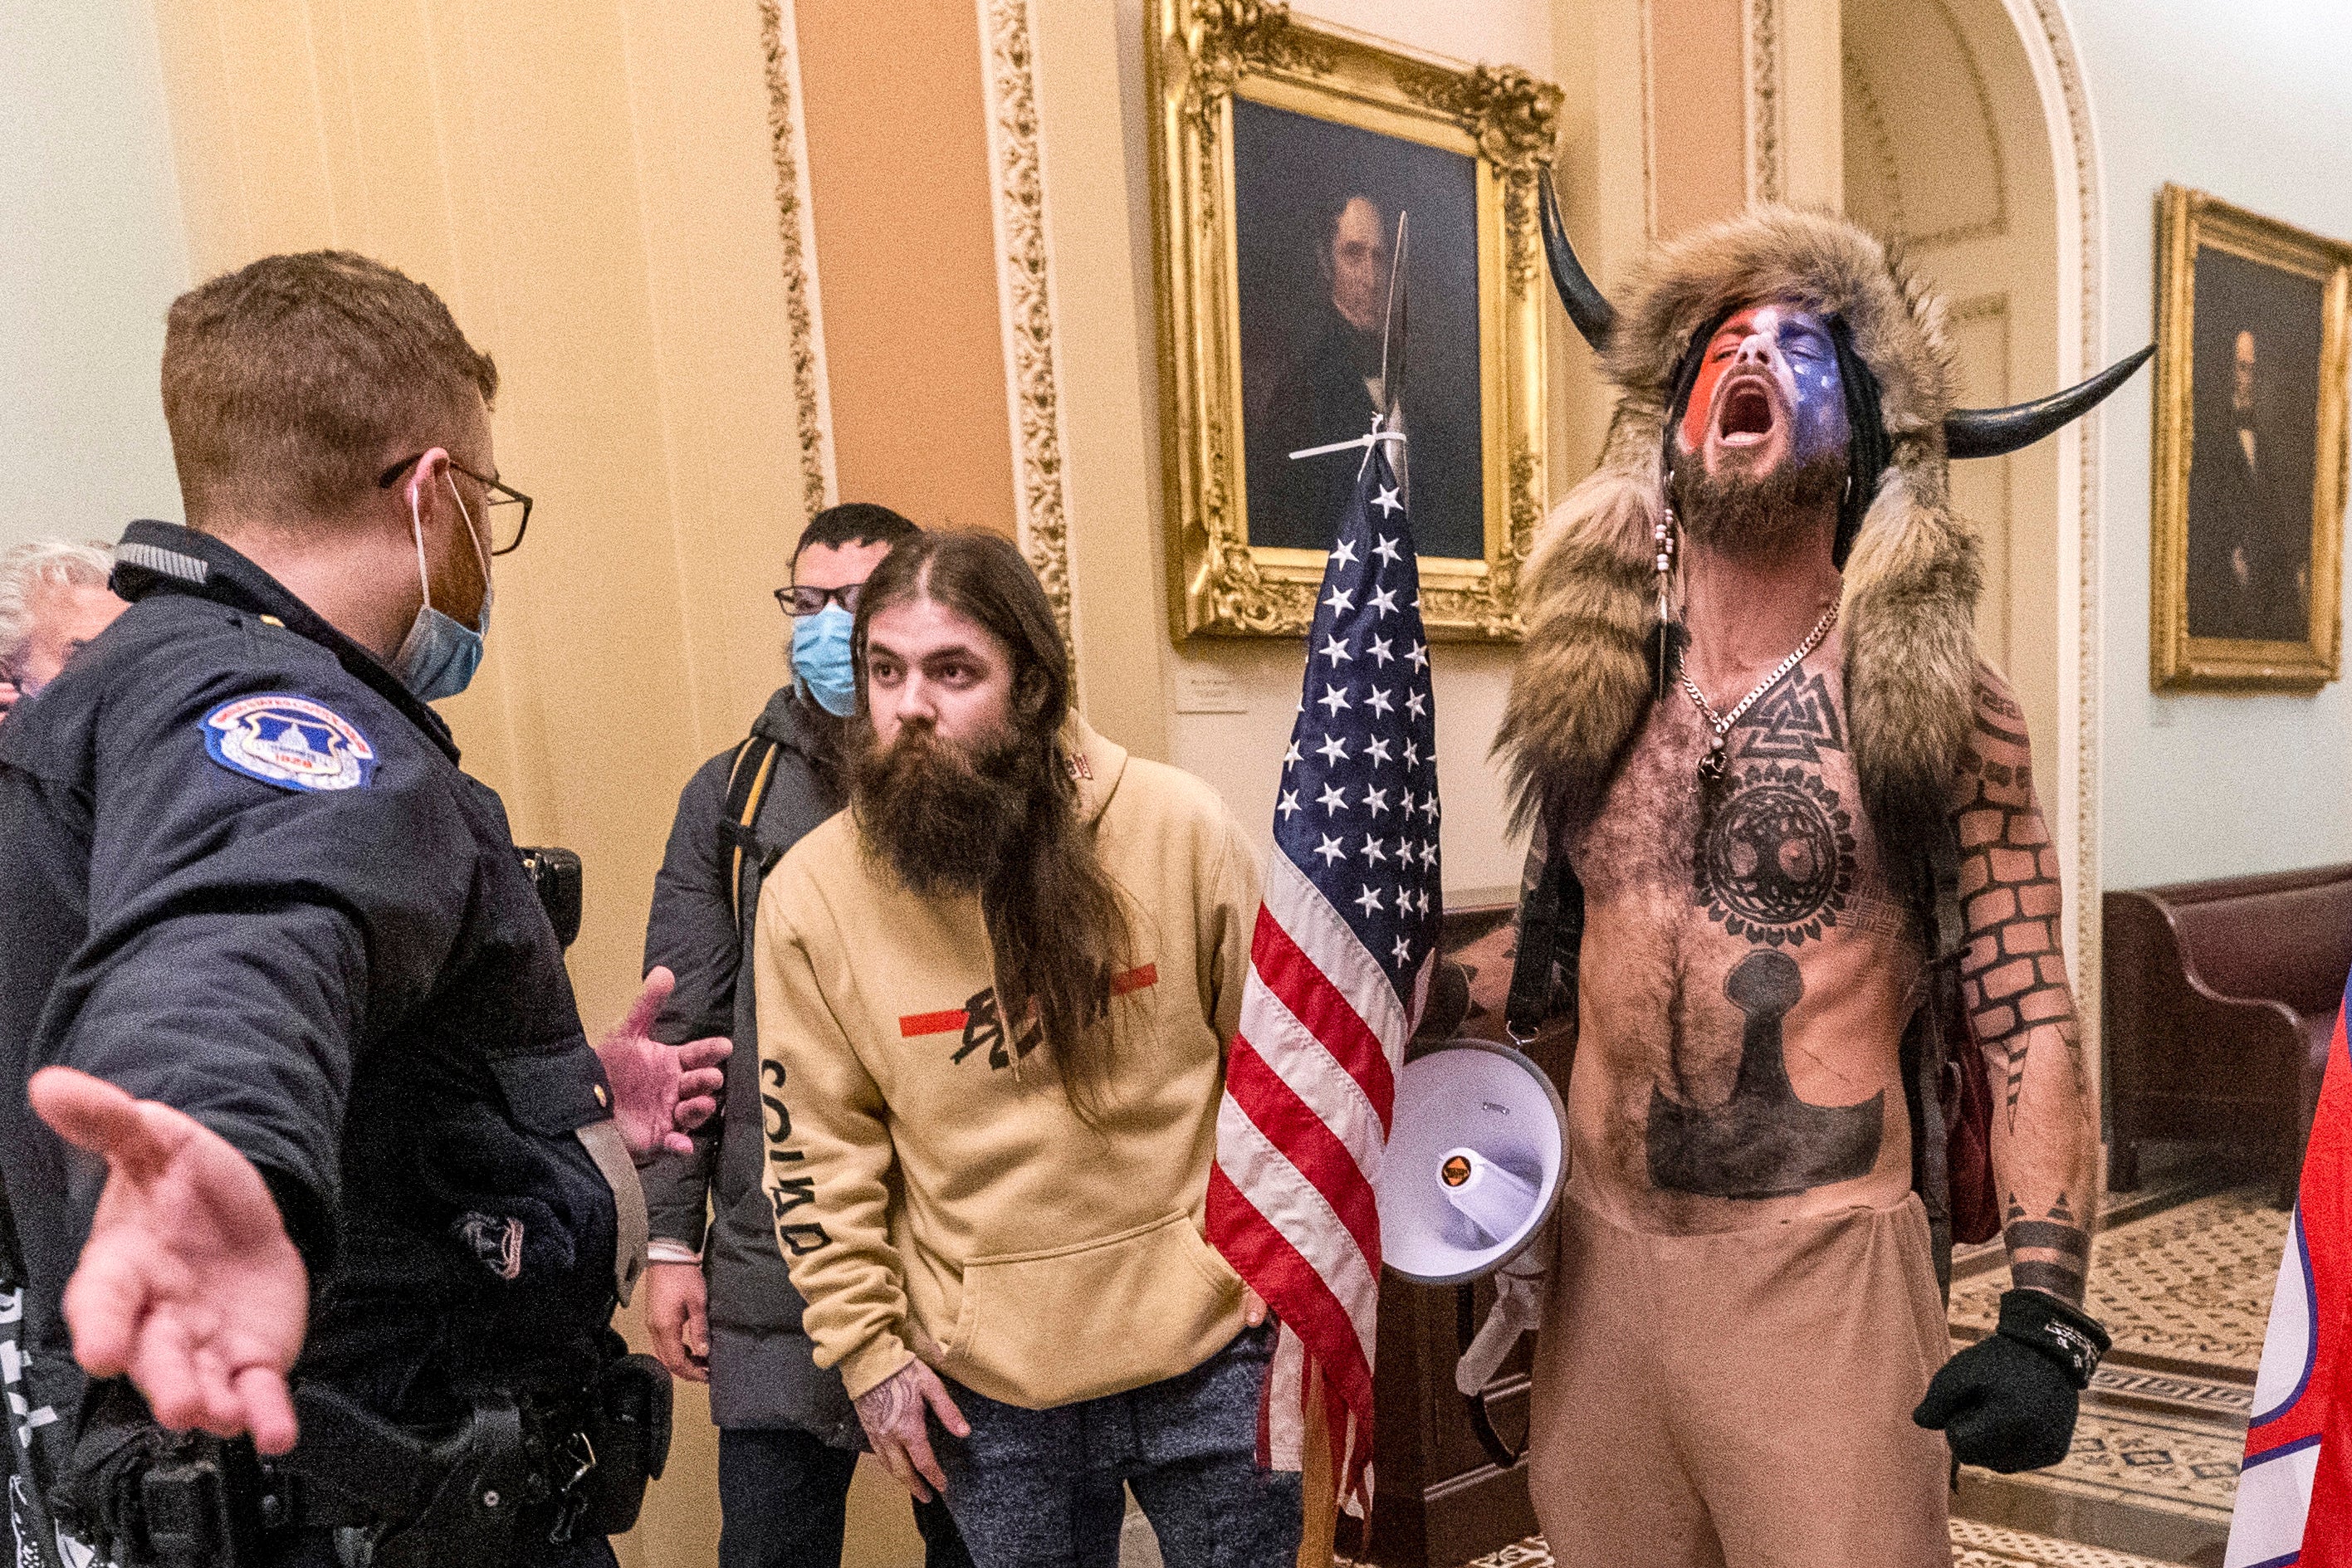 One of the most notorious of the Capitol rioters, self-styled ‘Q Shaman’ Jacob Chansley